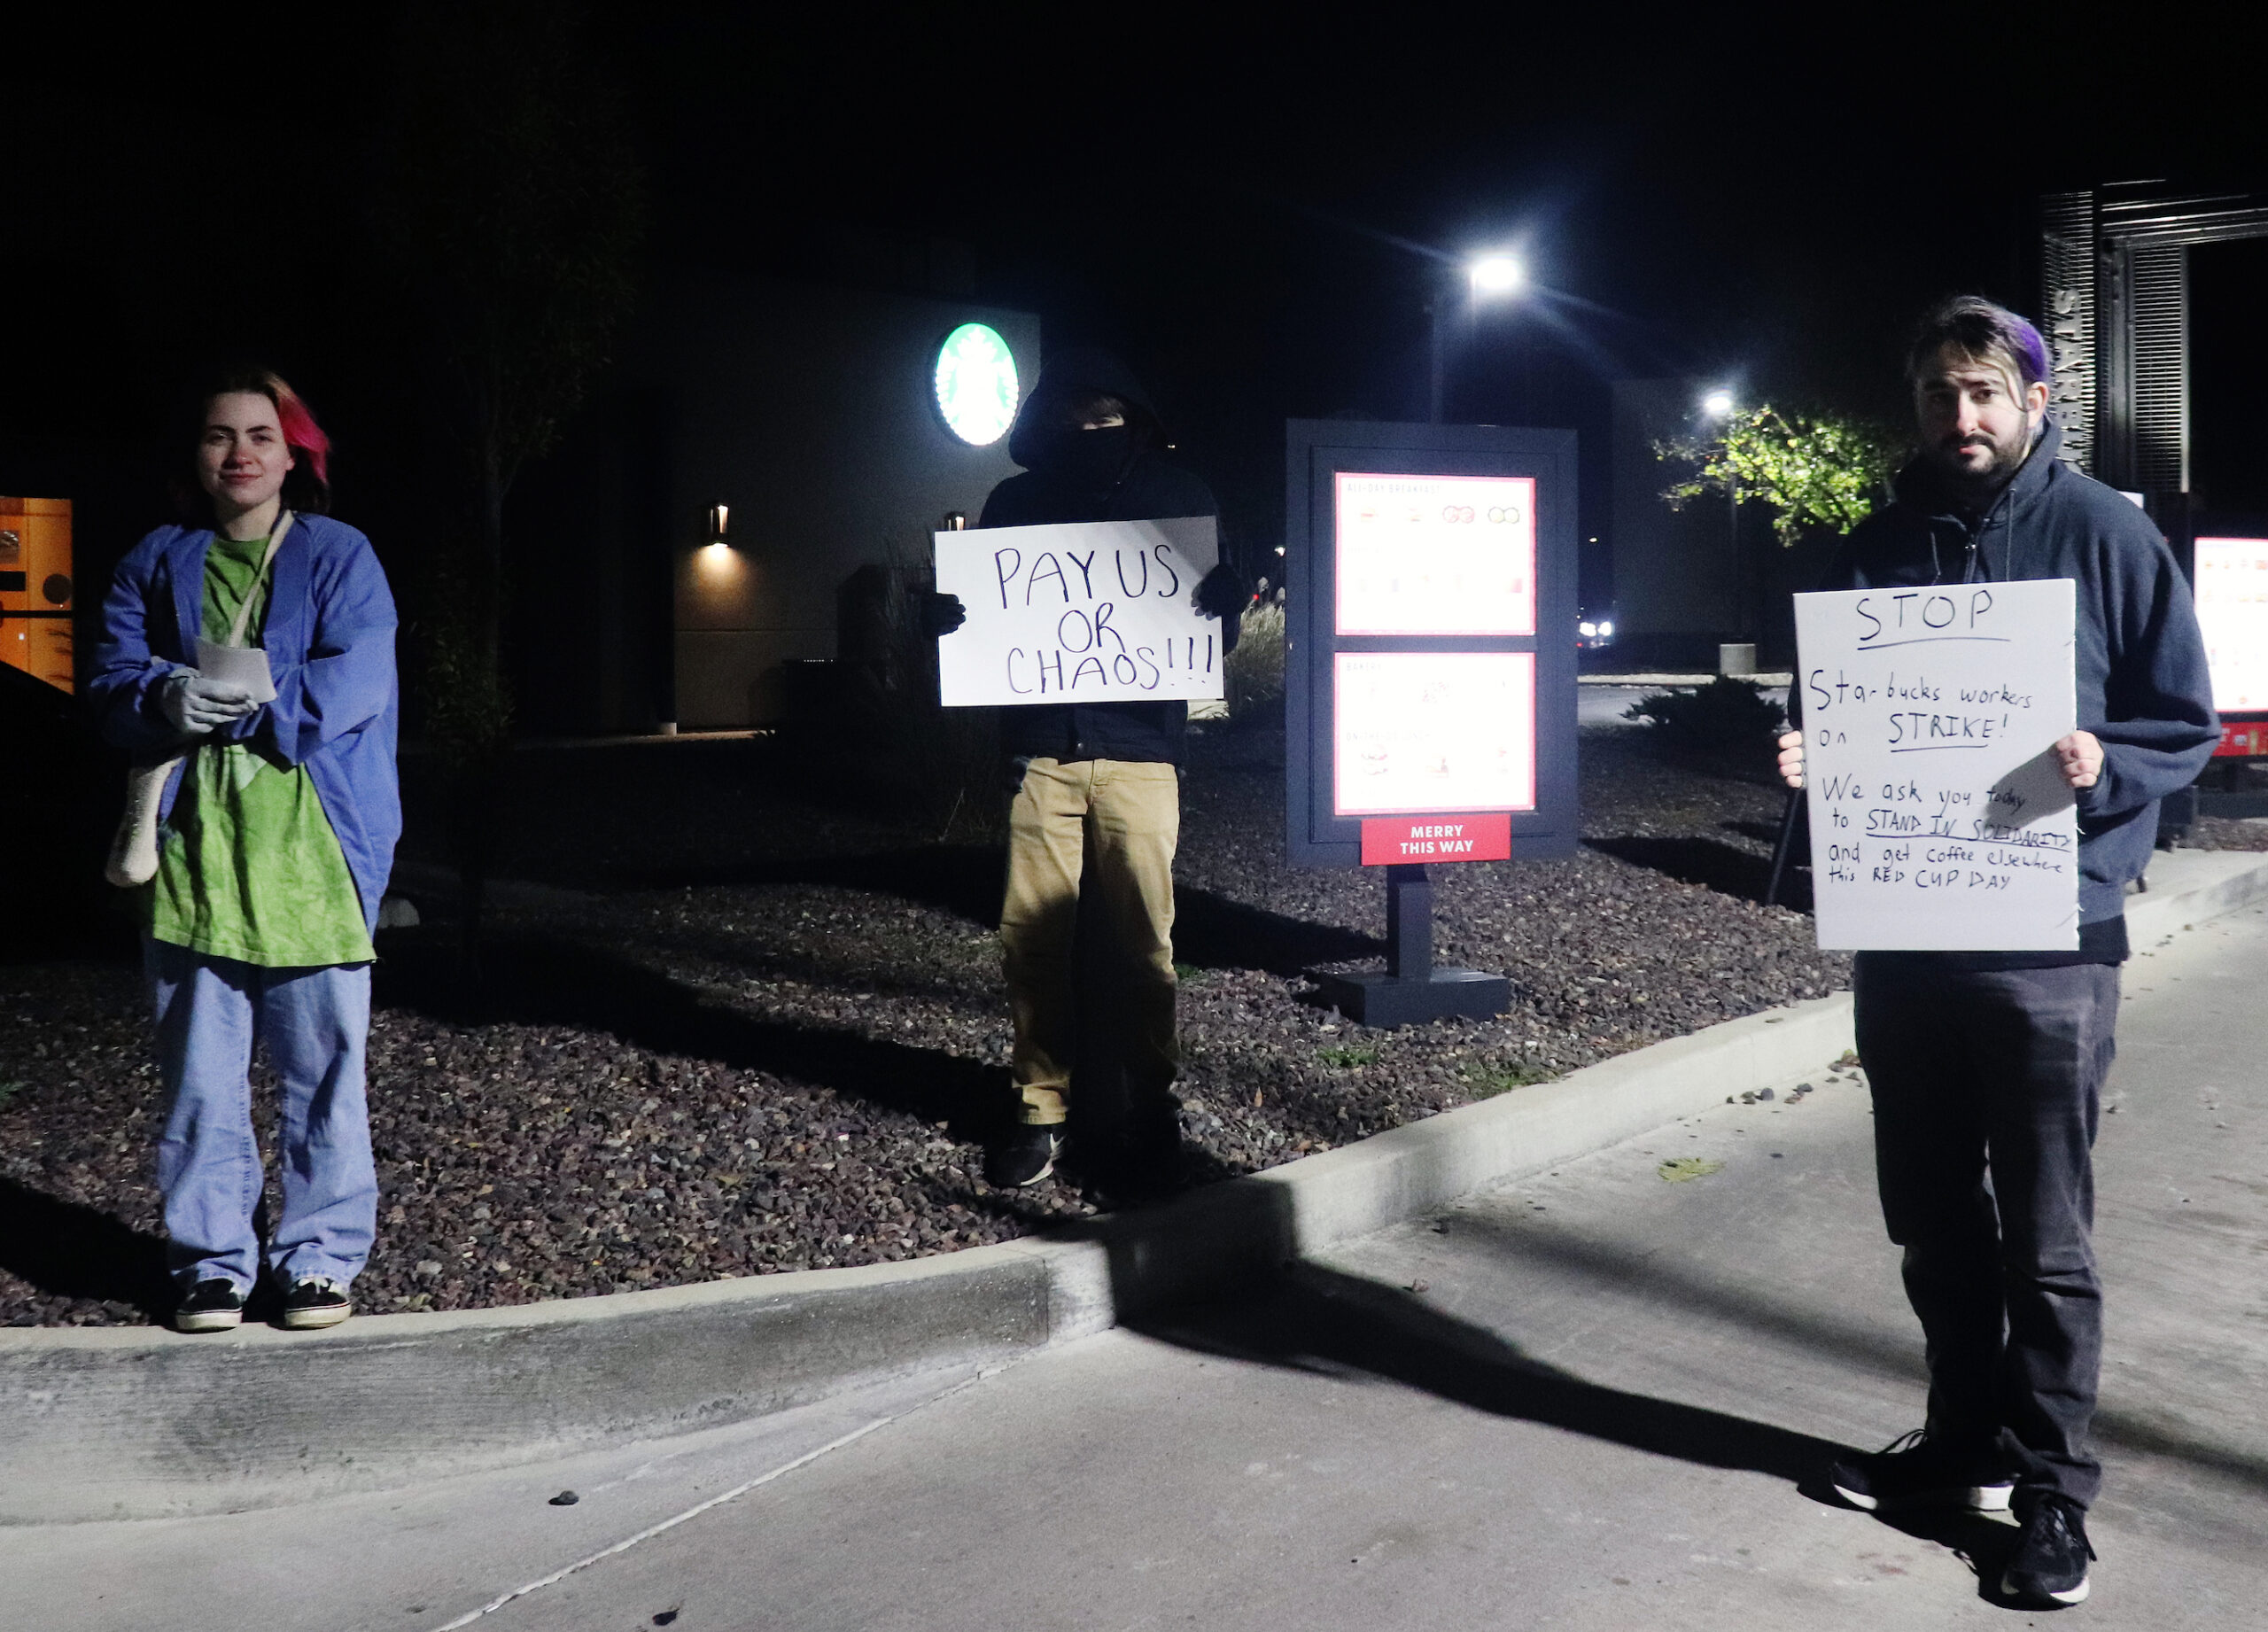 Workers stand in entrance to the Starbucks drive-through. One holds a sign that reads, “PAY US OR CHAOS!!!” A second implores customers not to cross the picket line.